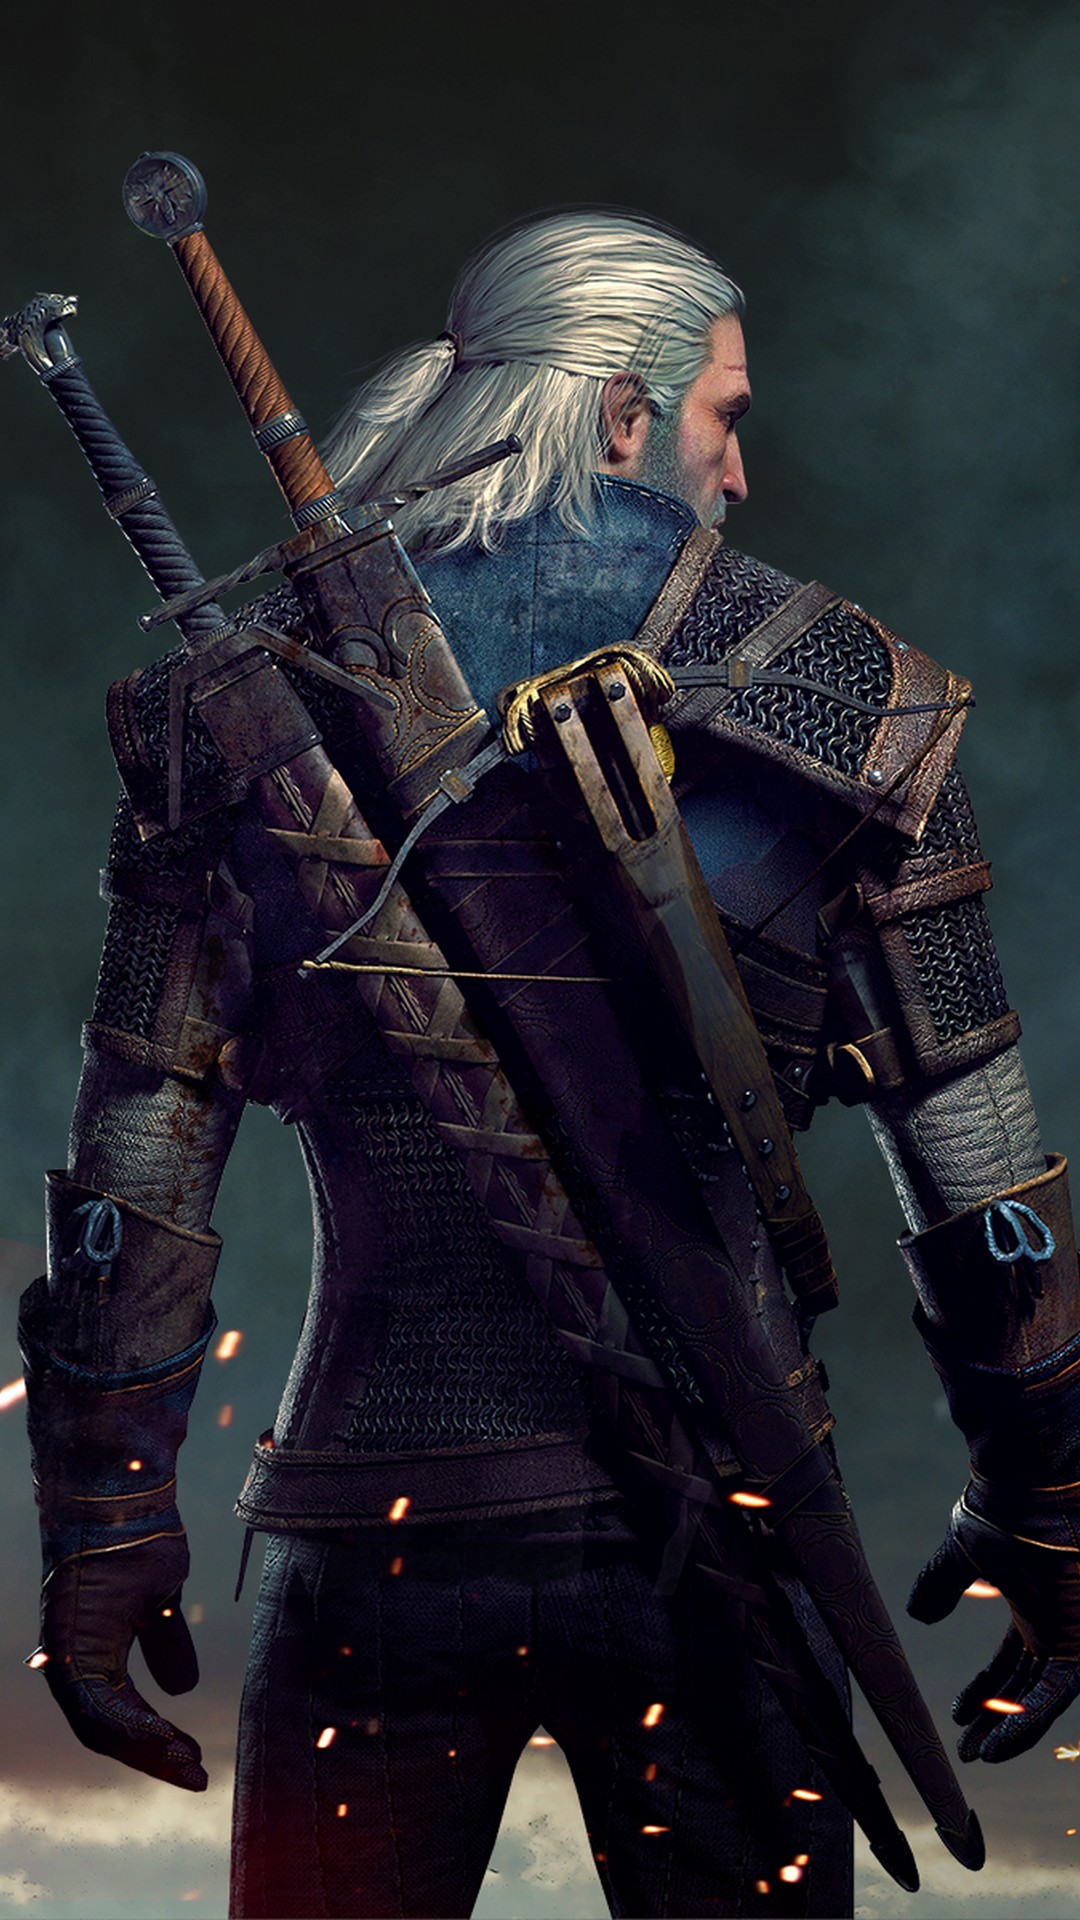 The Witcher Phone Wallpaper with high-resolution 1080x1920 pixel. Download all Mobile Wallpapers and Use them as wallpapers for your iPhone, Tablet, iPad, Android and other mobile devices